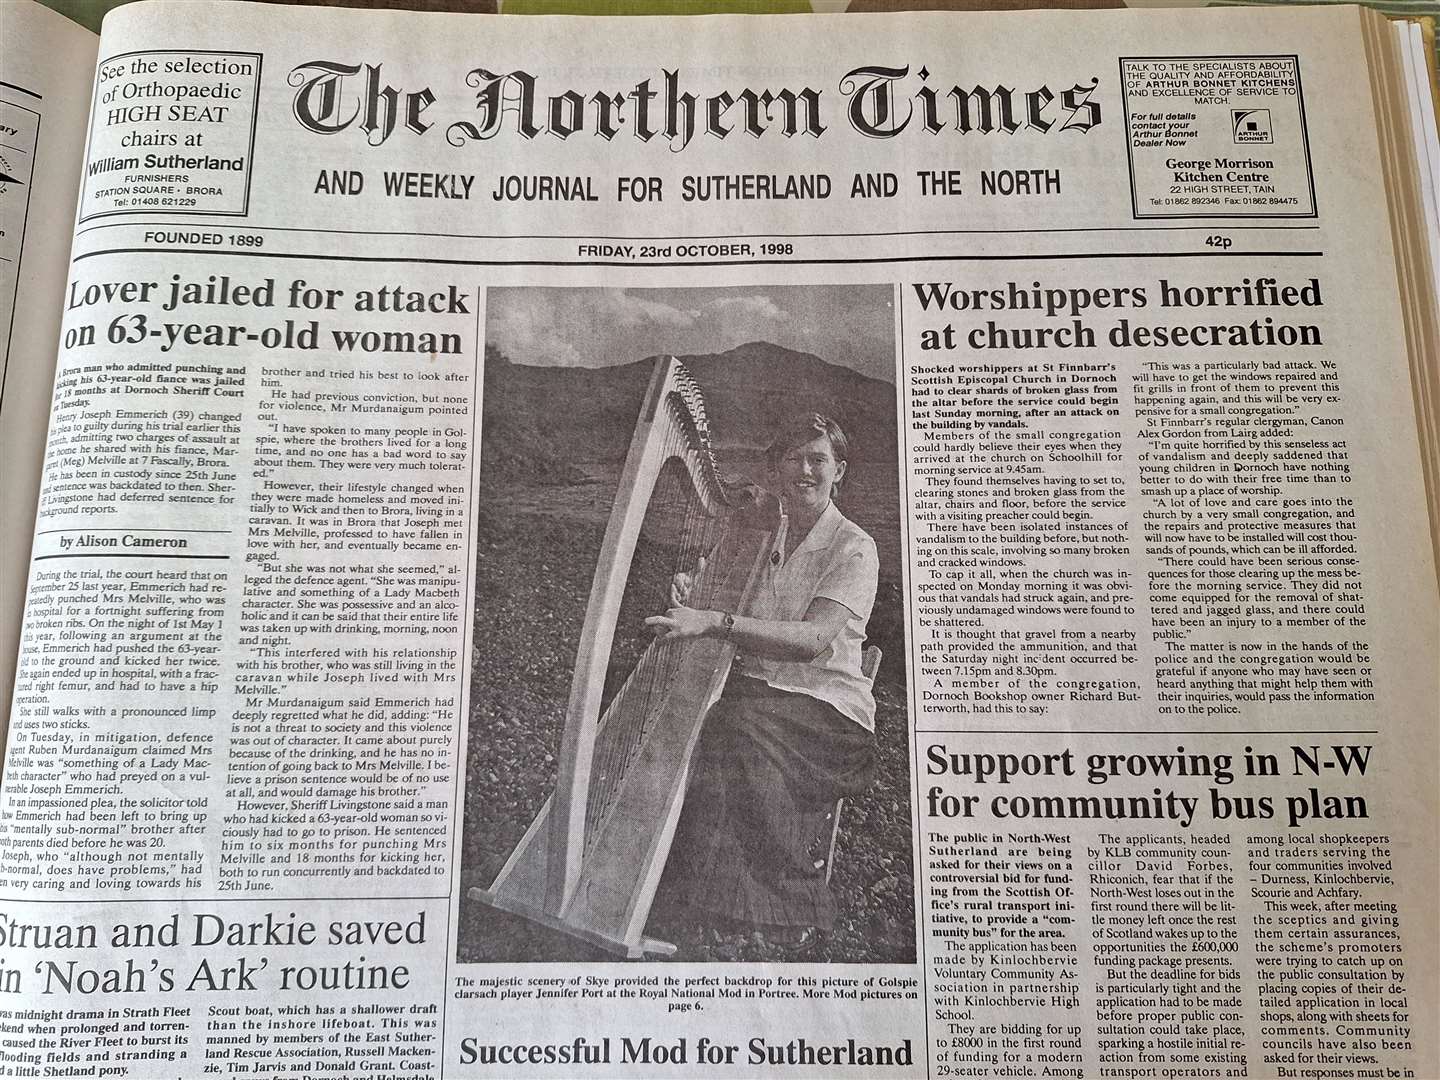 The Northern Times of October 23, 1998.